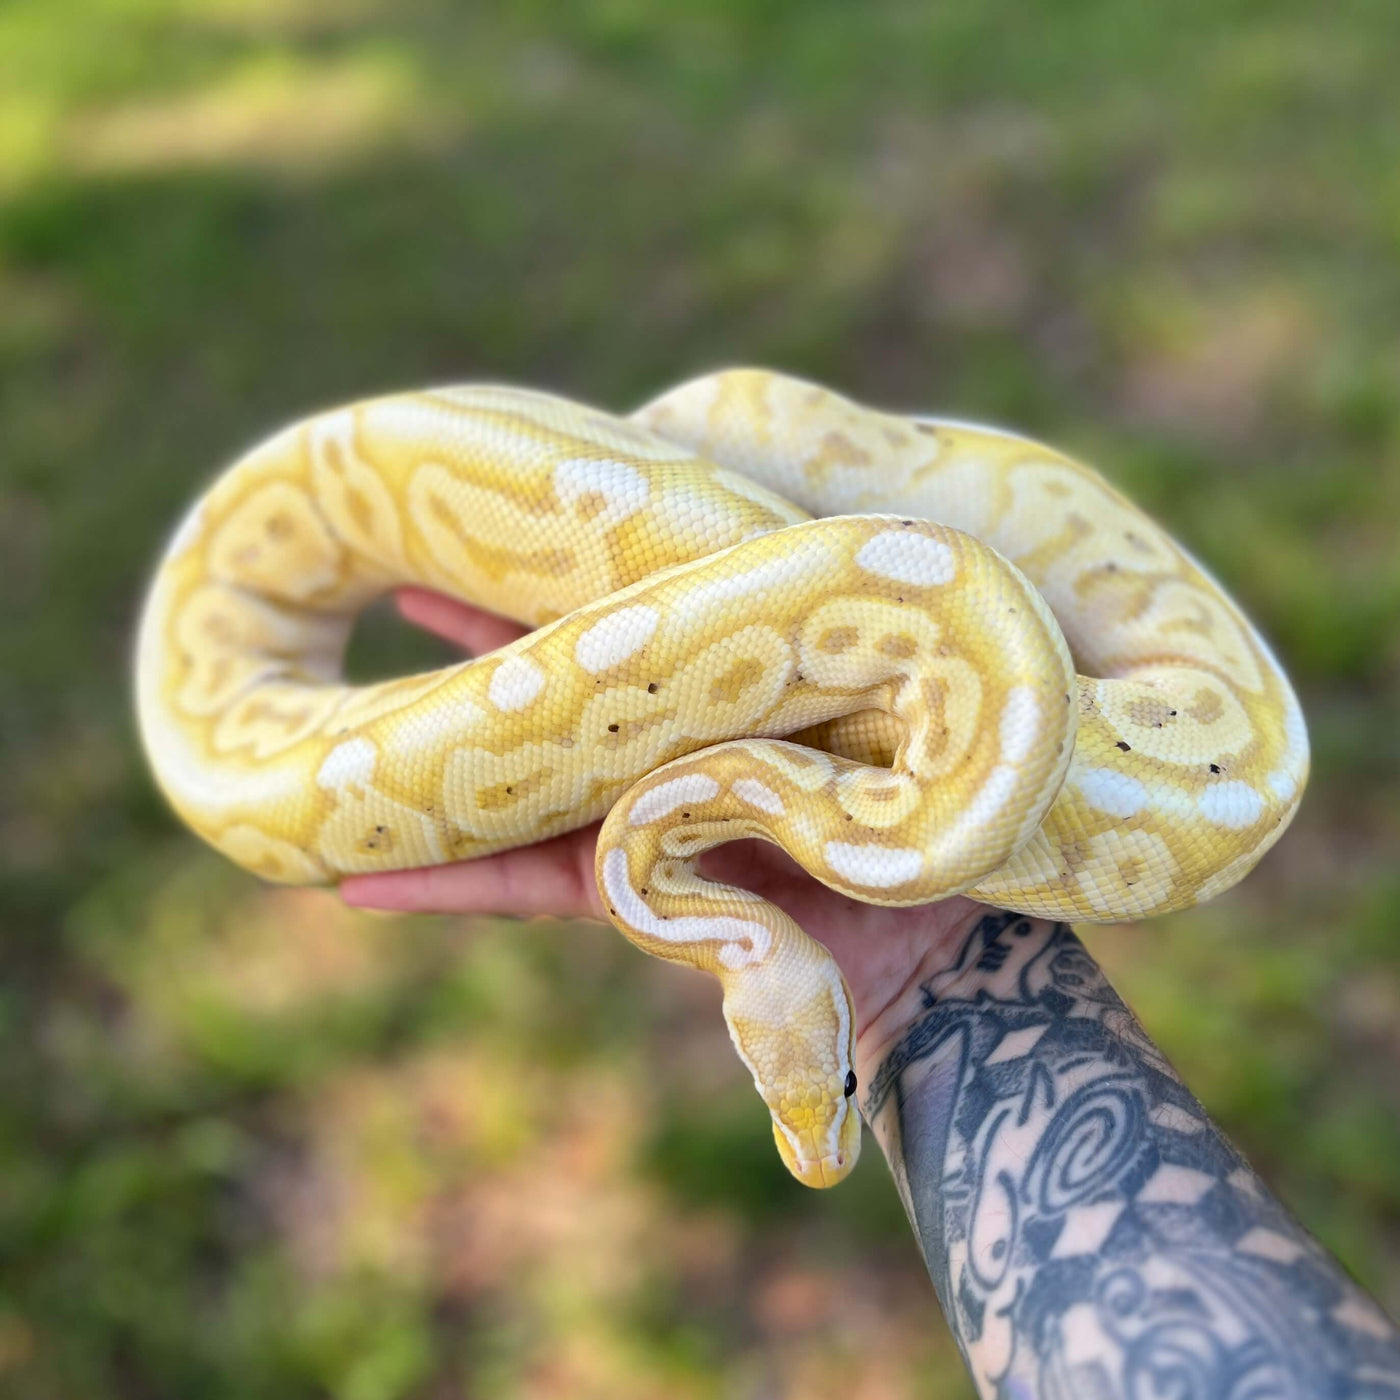 banana pewter ball python for sale online at cheap prices, buy ball pythons near me